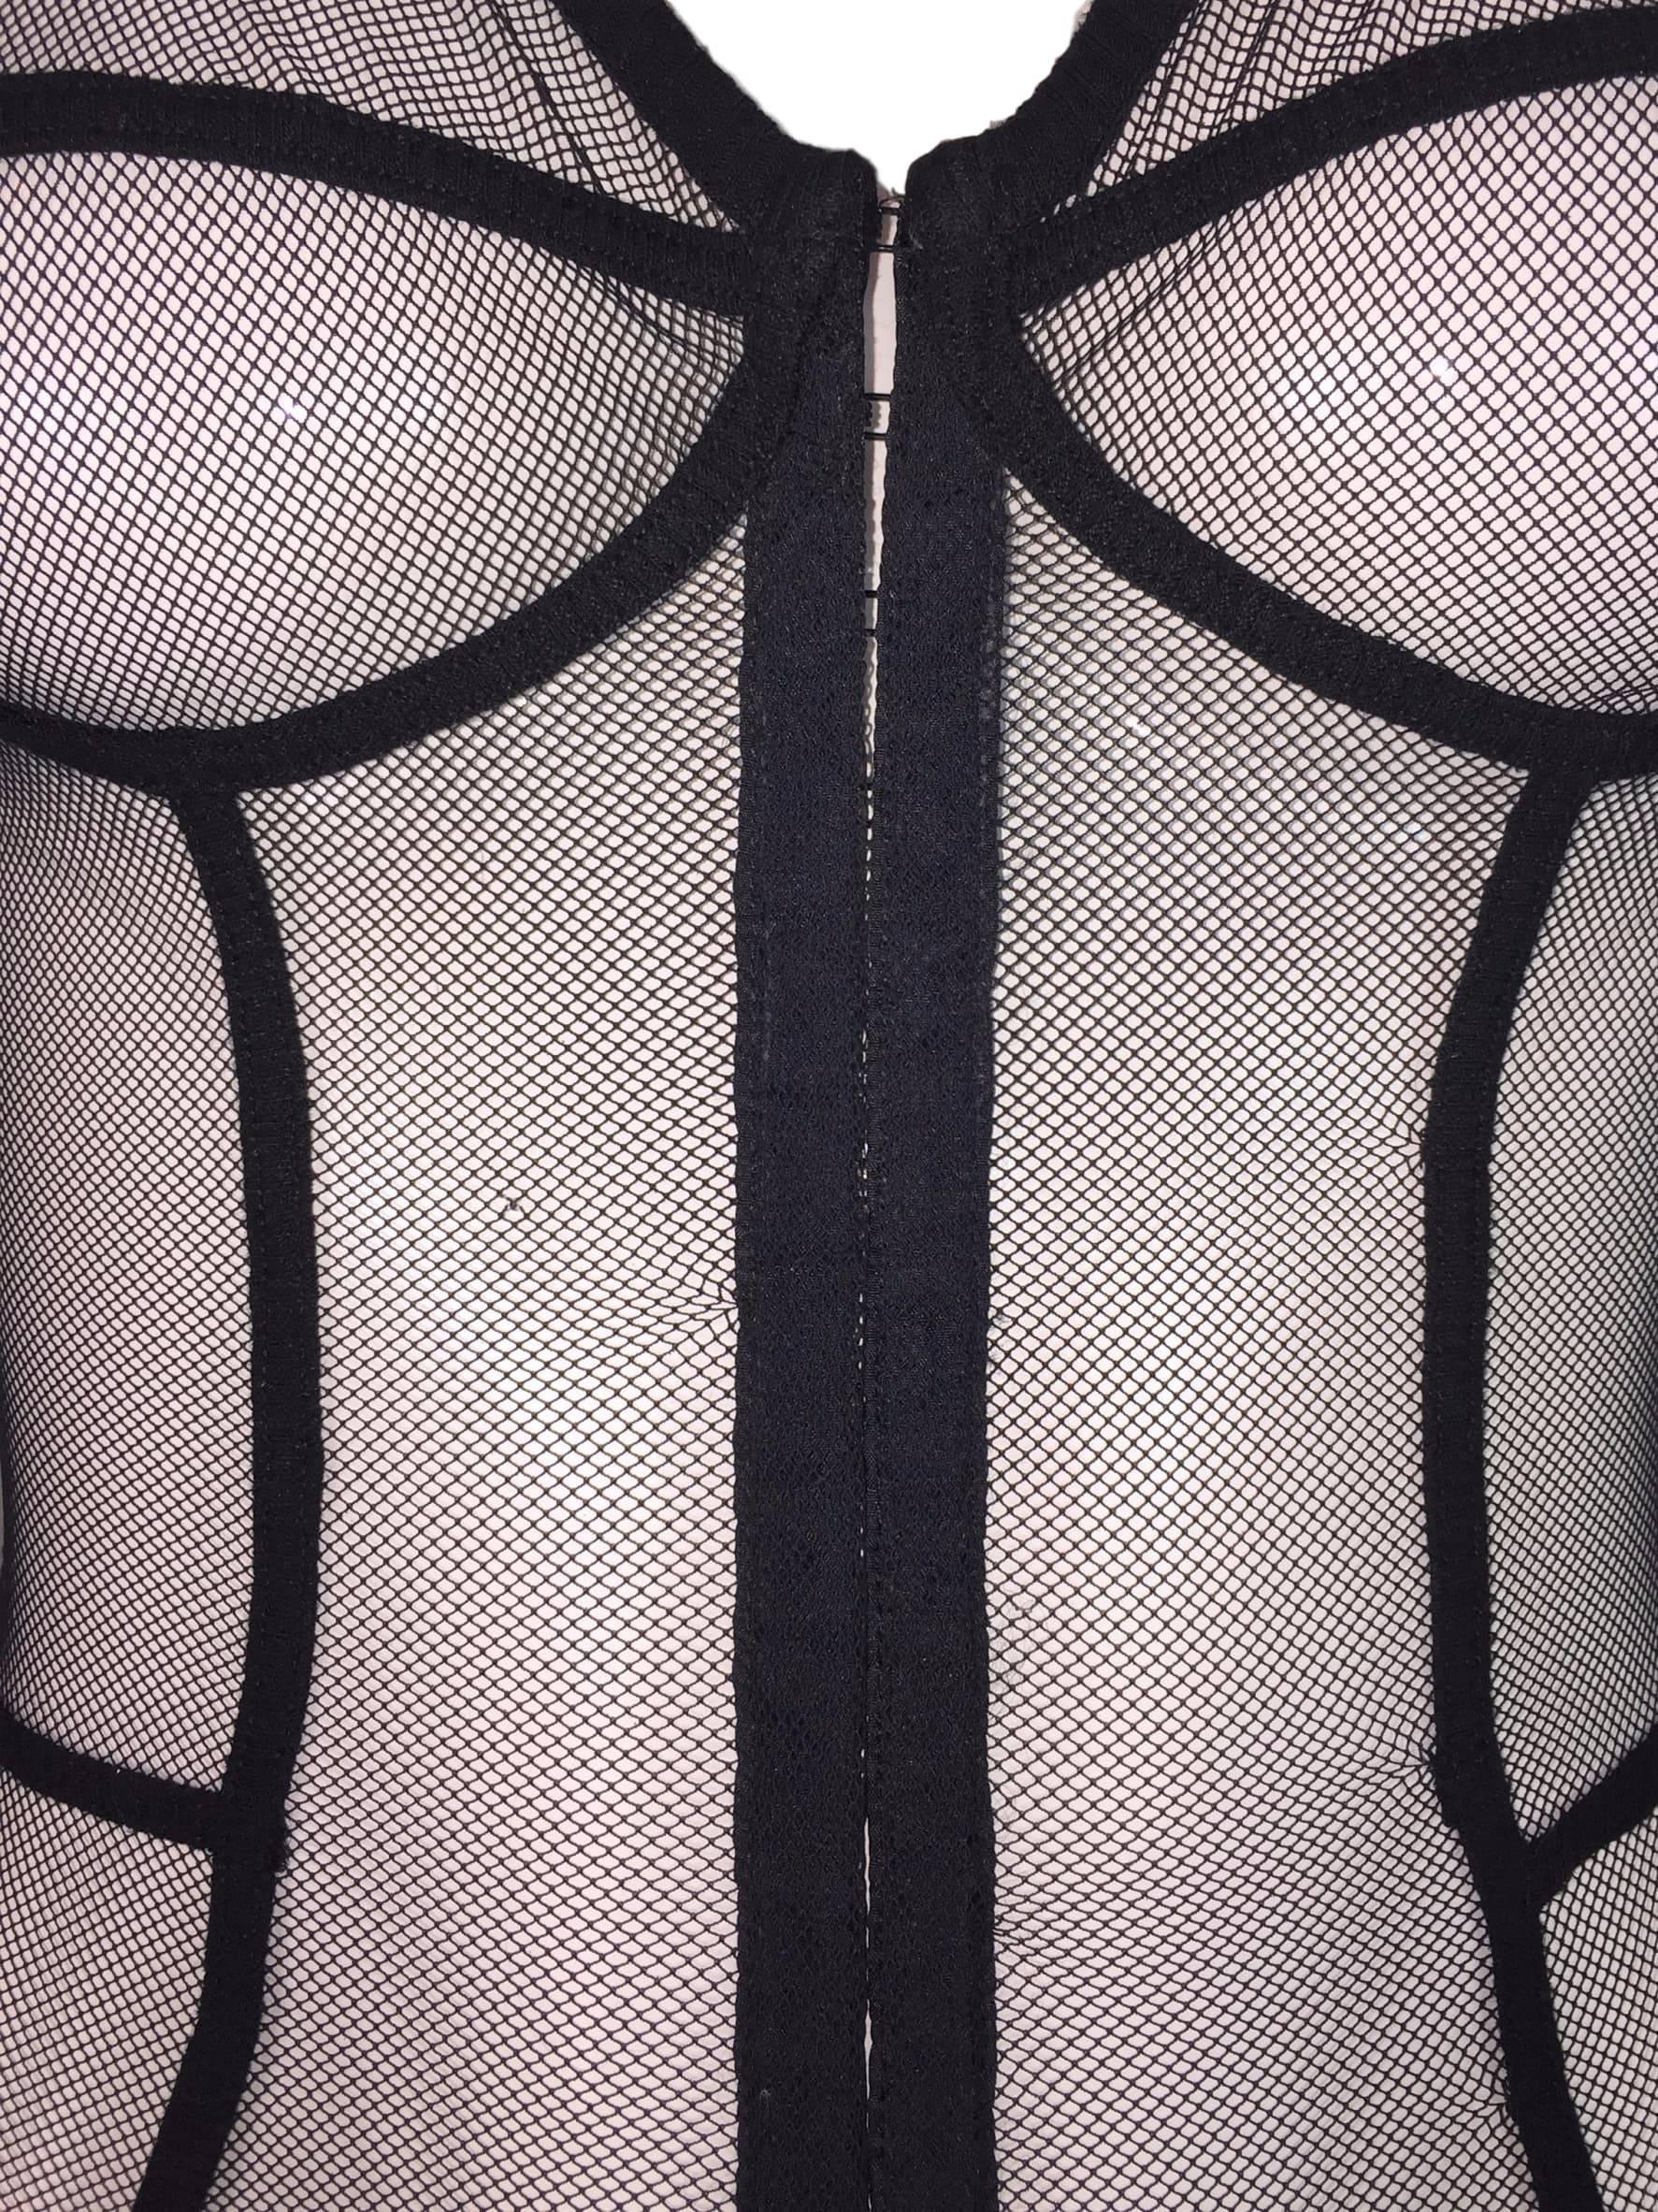 DESIGNER: 1990's Dolce & Gabbana Intimo

Please contact for more information and/or photos.

CONDITION: Good- has a few tiny repairs to mesh.

MATERIAL: Nylon/Elastane blend

COUNTRY MADE: Italy

SIZE: None- similar to XS/S with a lot of